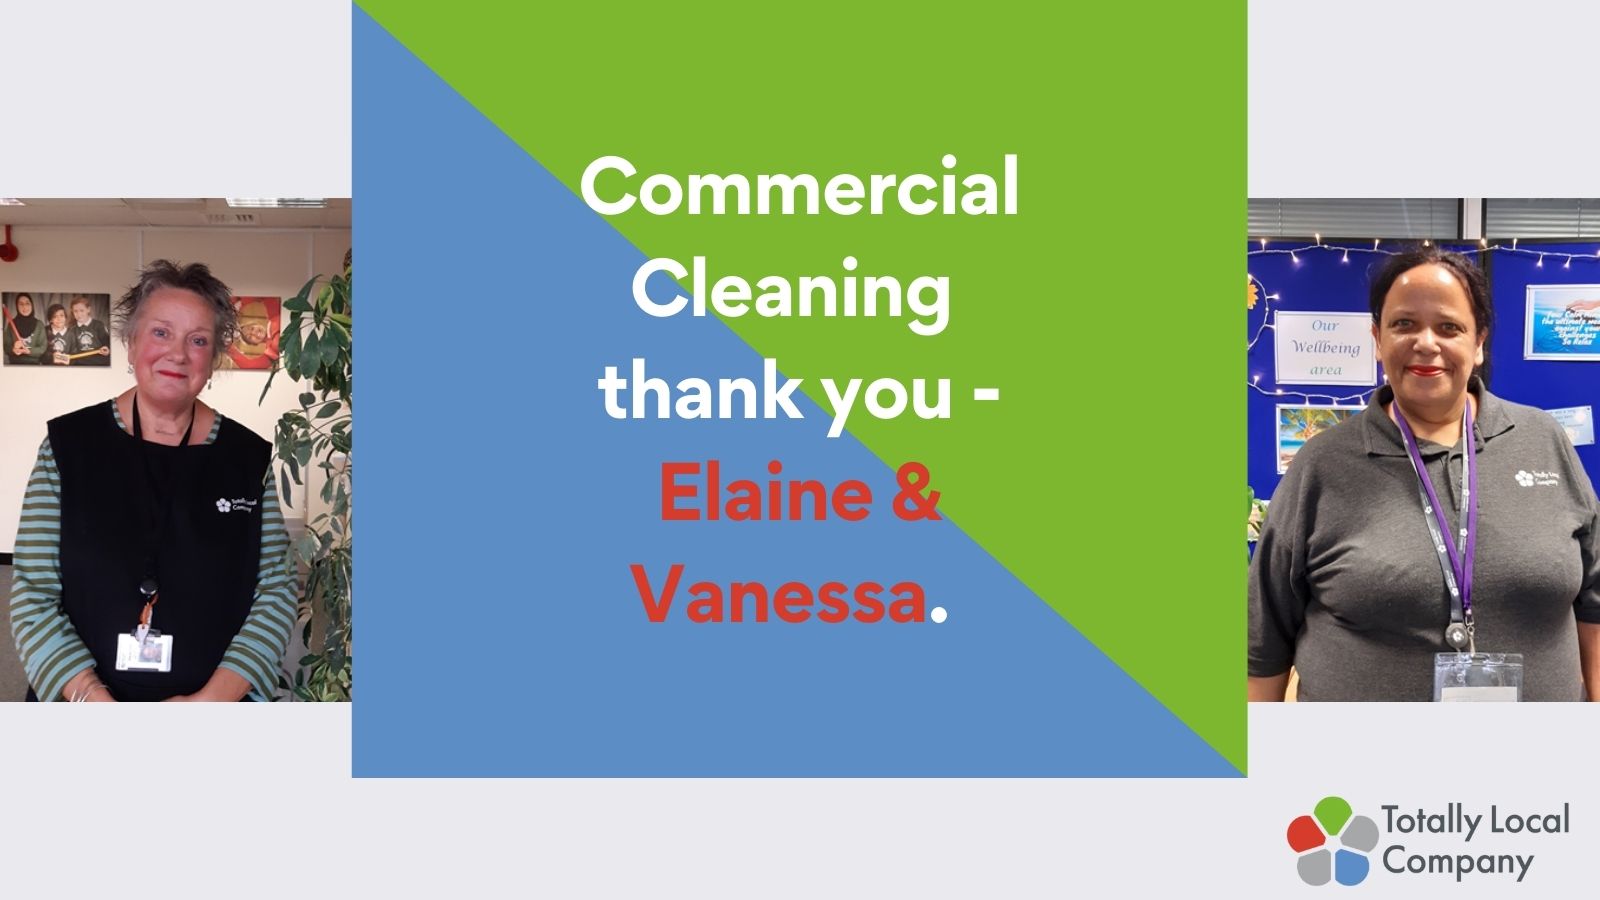 wording - commercial cleaning thank you Elaine and Vanessa. separate photos of Elaine and Vanessa.